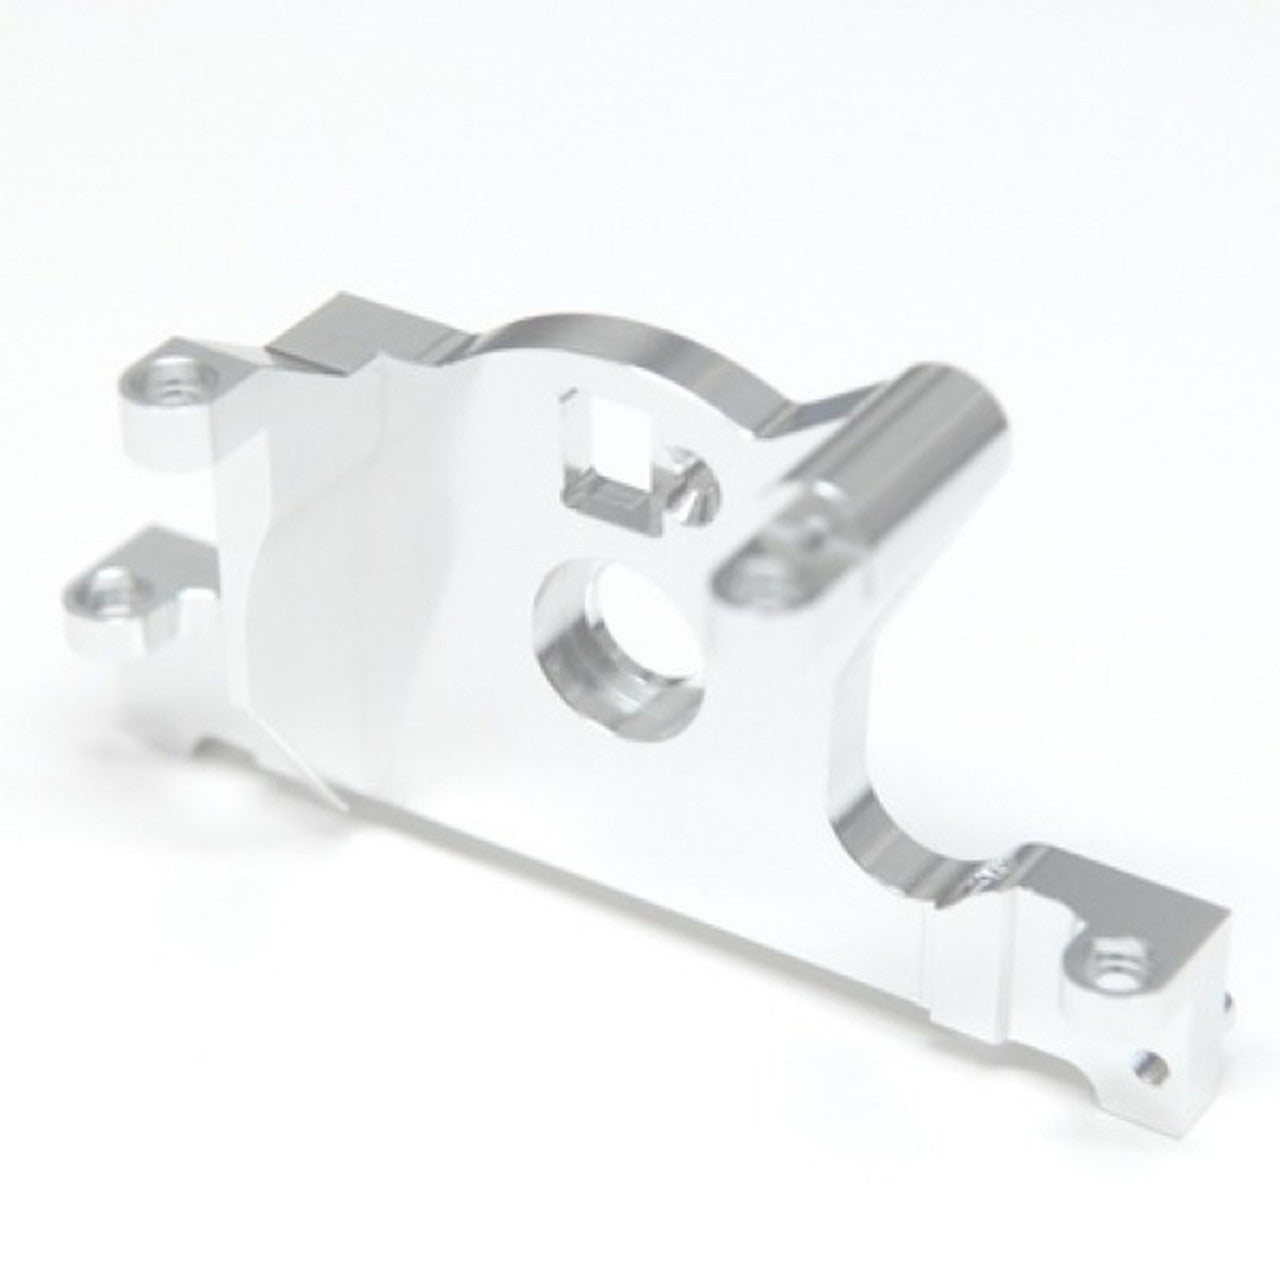 STRC ST7460S ST Racing Concepts Motor Mount Silver for Traxxas Slash 4x4 LCG / Rally